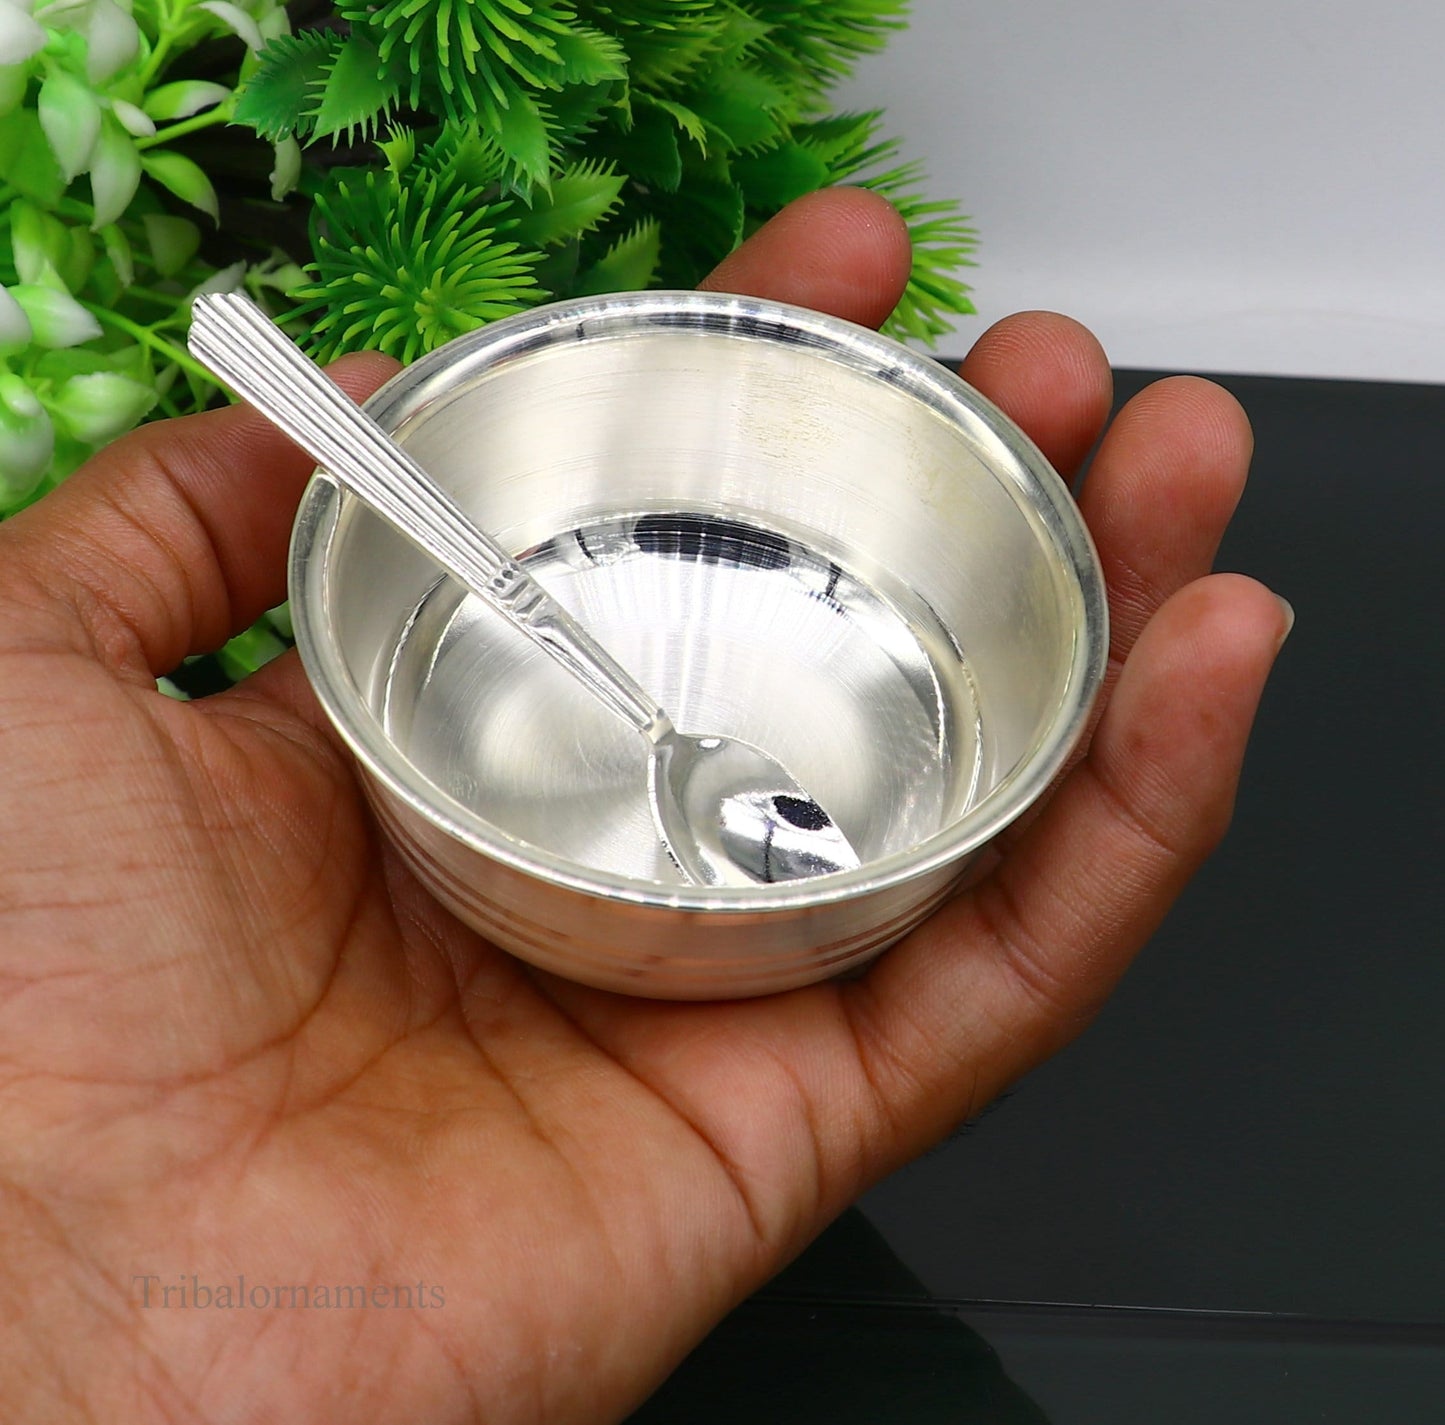 999 fine solid silver handmade small bowl for baby serving, pure silver vessel, silver utensils, home kitchen accessories puja bowl sv224 - TRIBAL ORNAMENTS